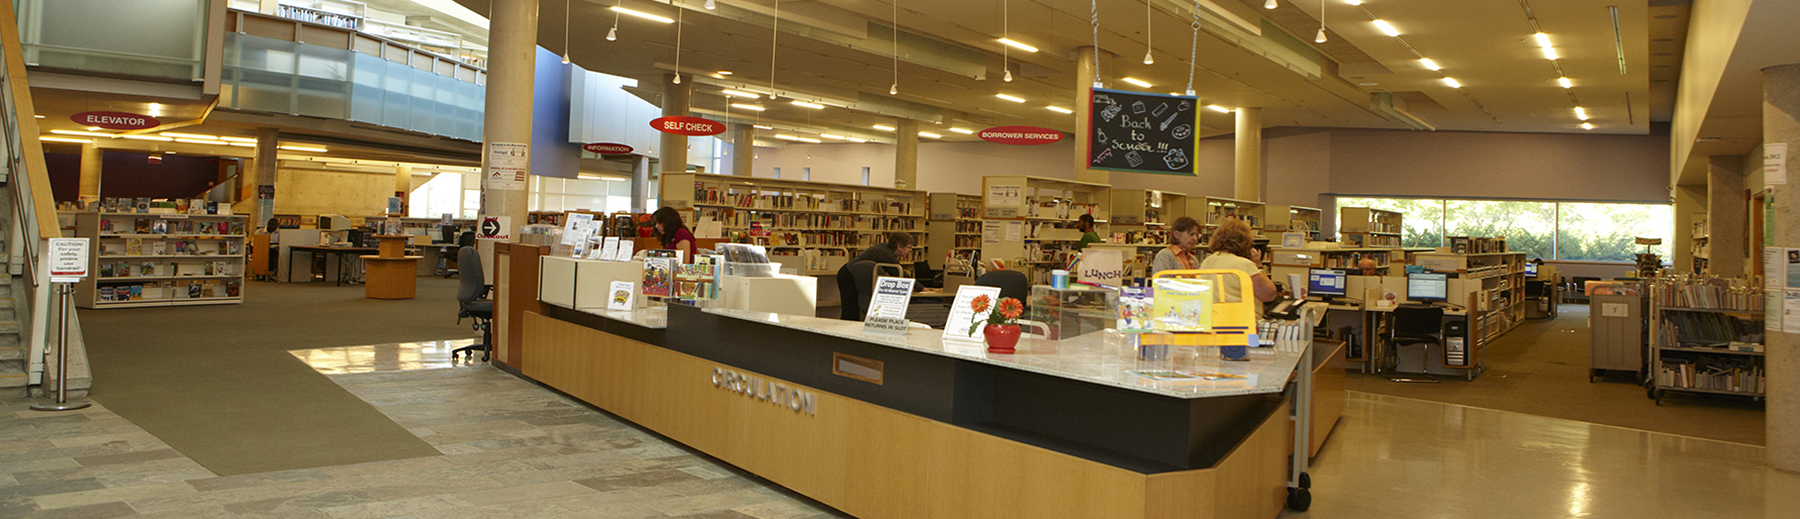 Front counter at the Ajax Public Library